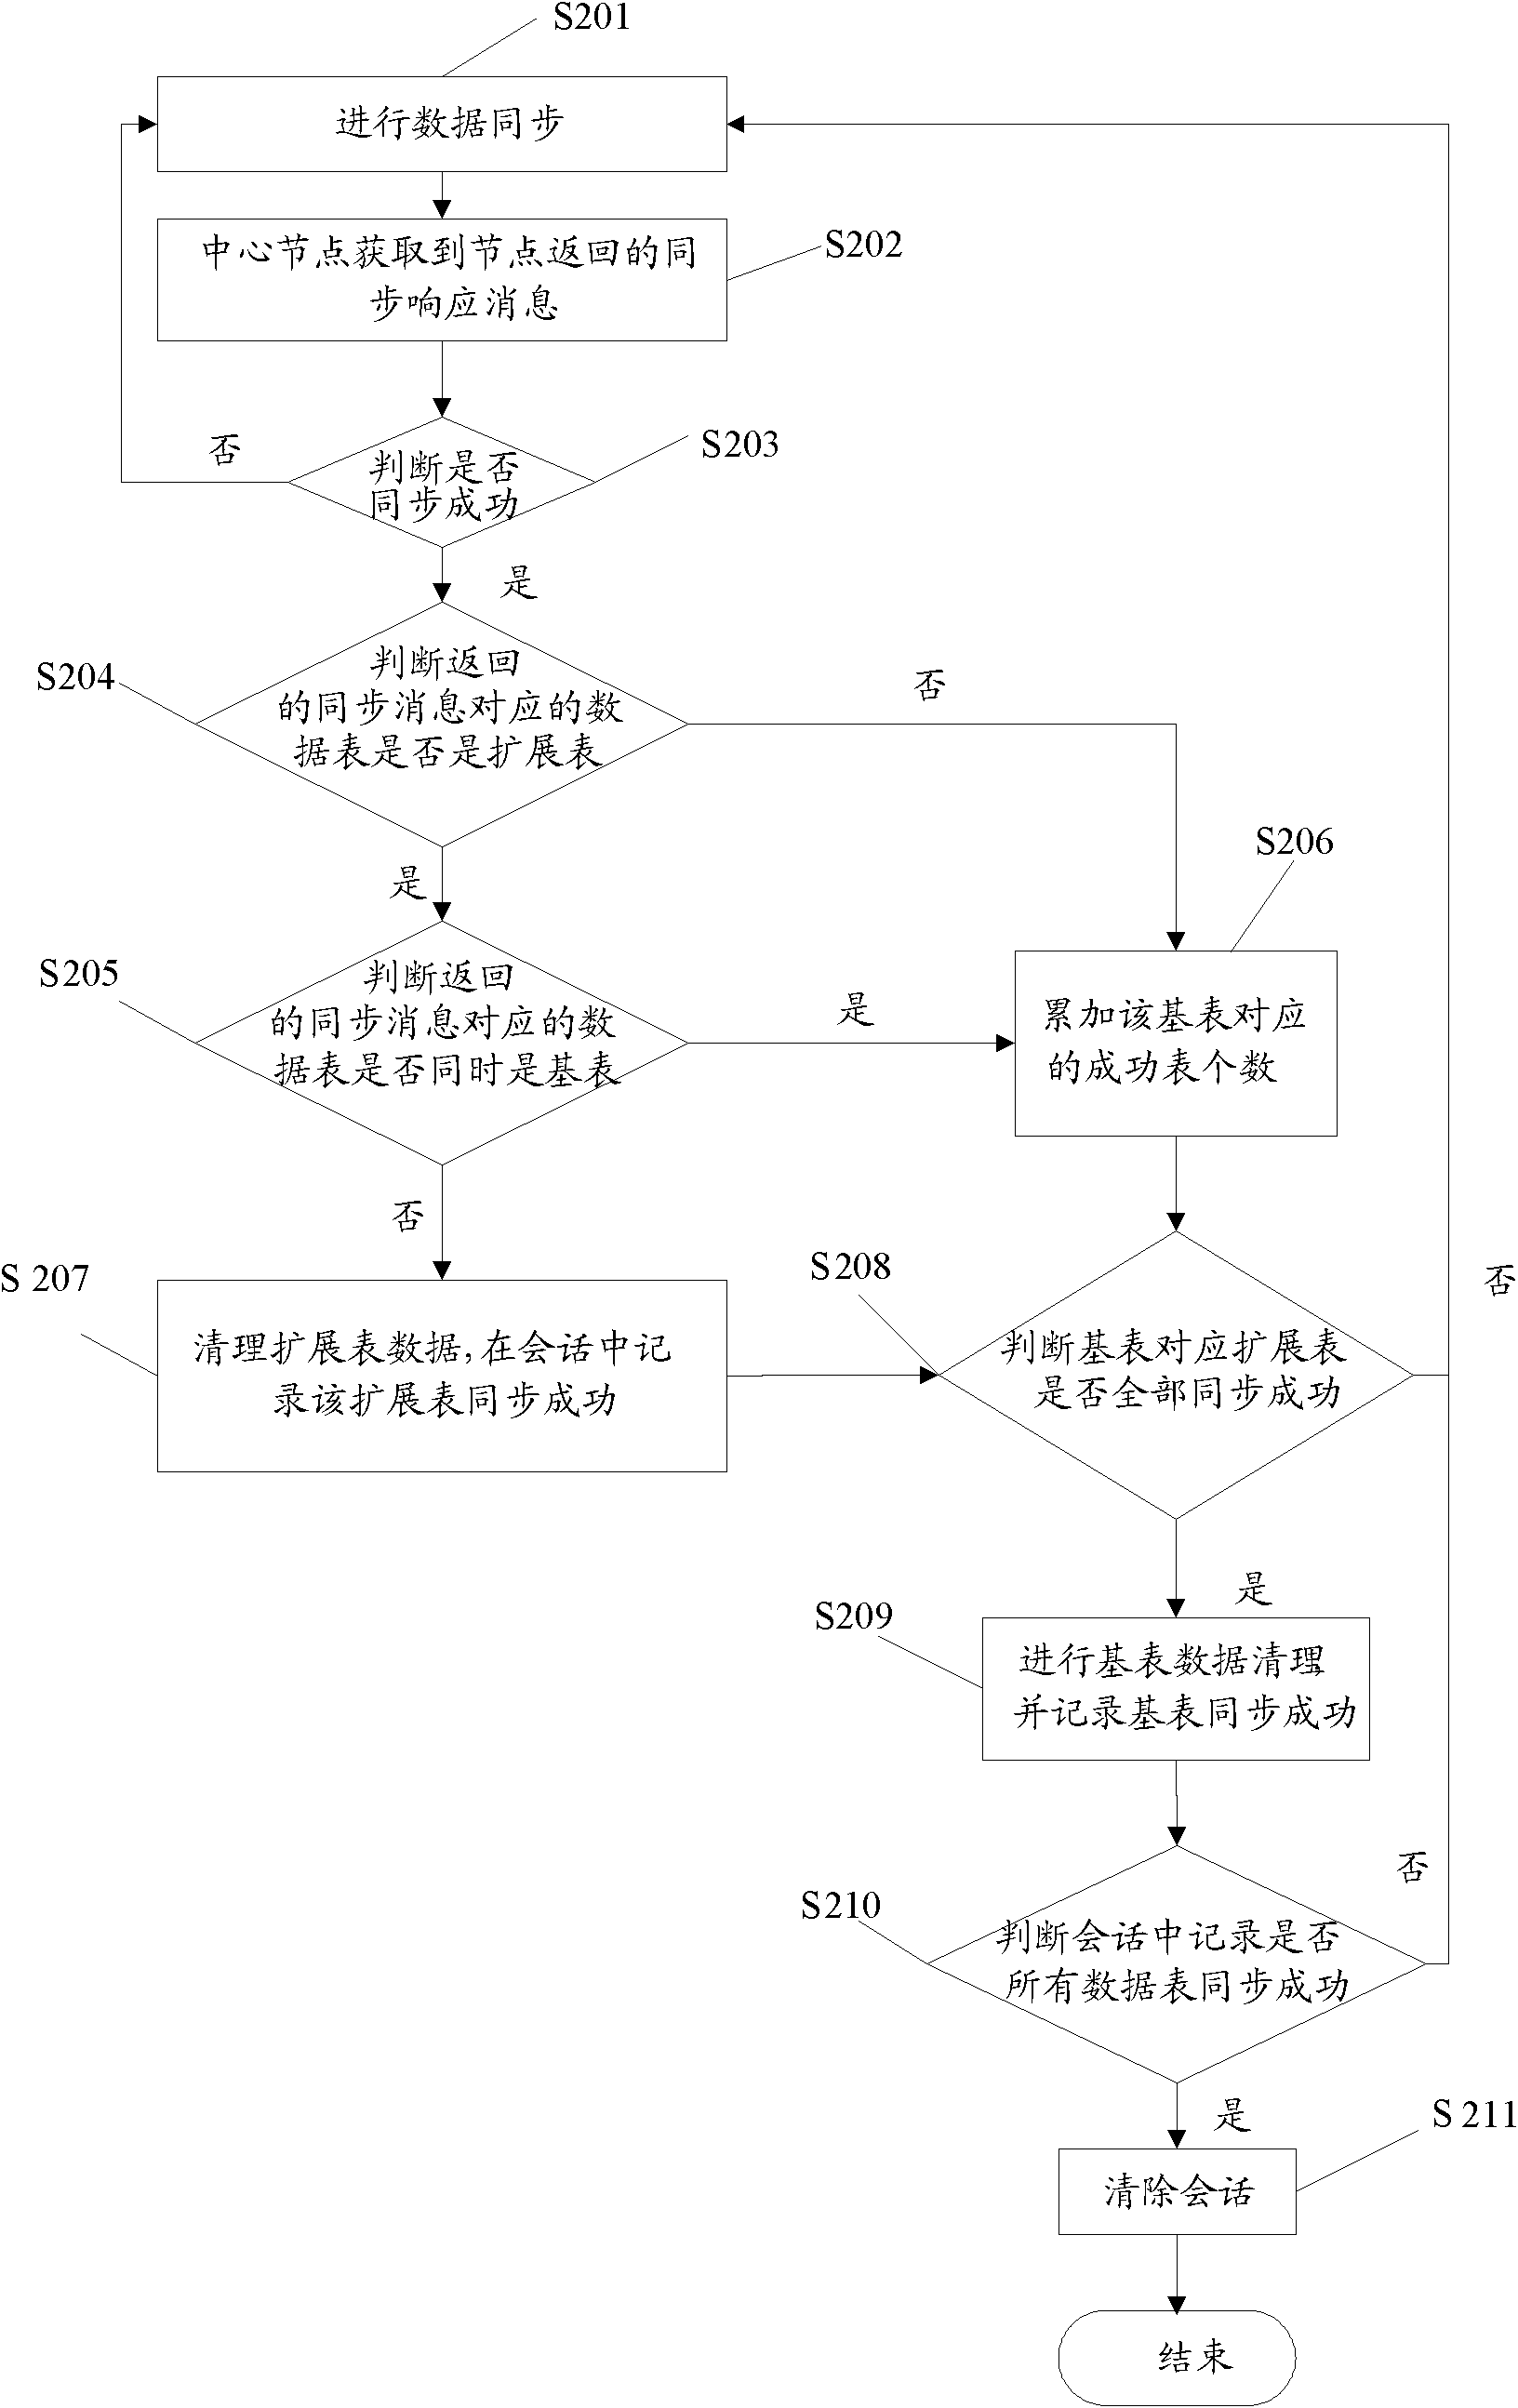 Method and system for cleaning synchronous data